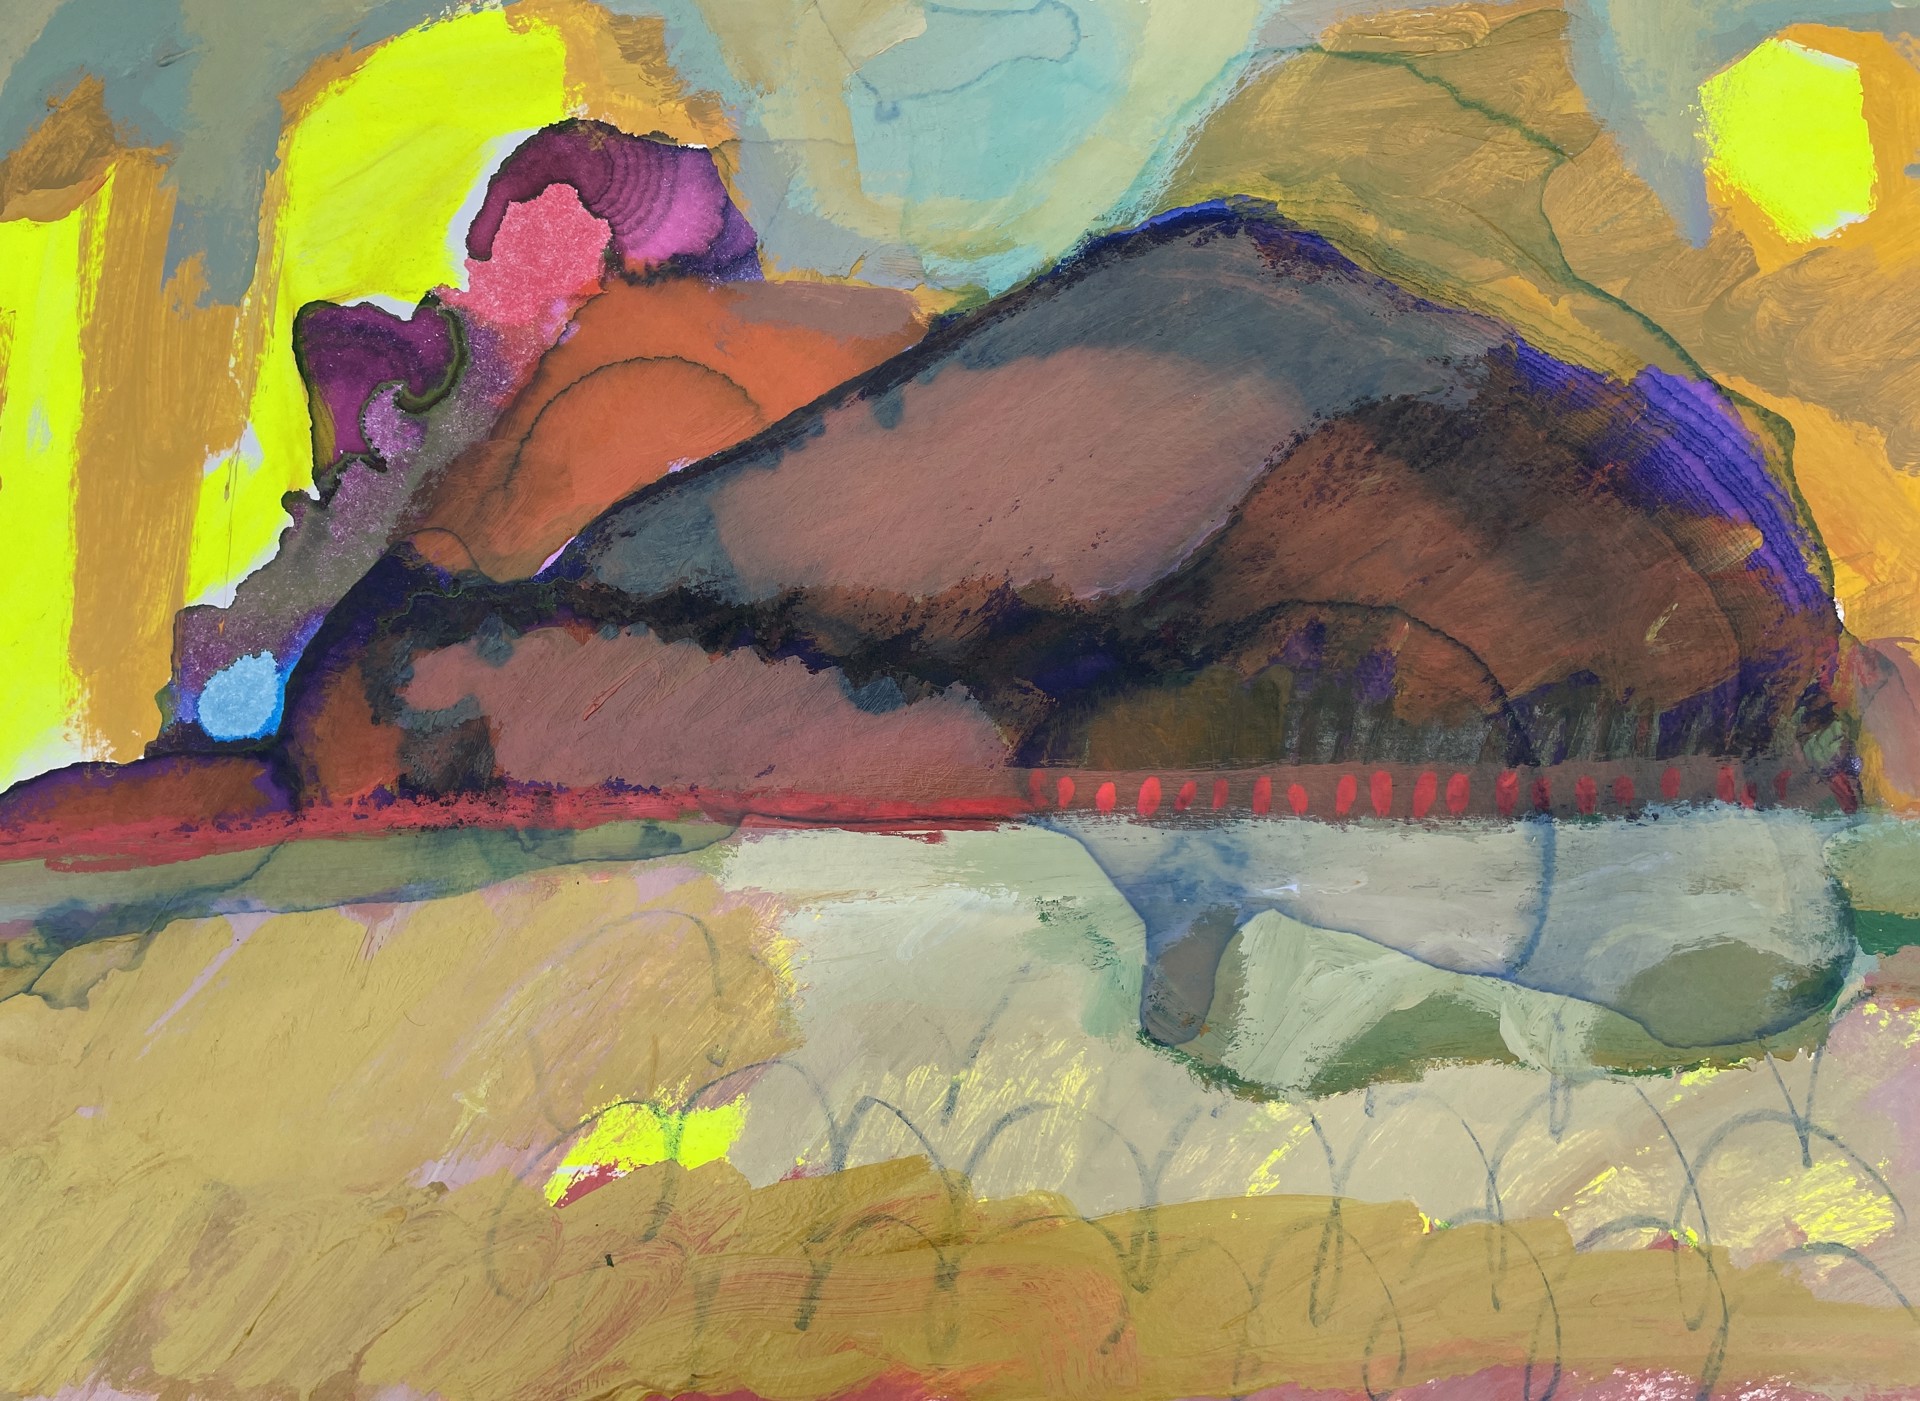 Mauve Mountains with Shafts of Light by Rachael Van Dyke